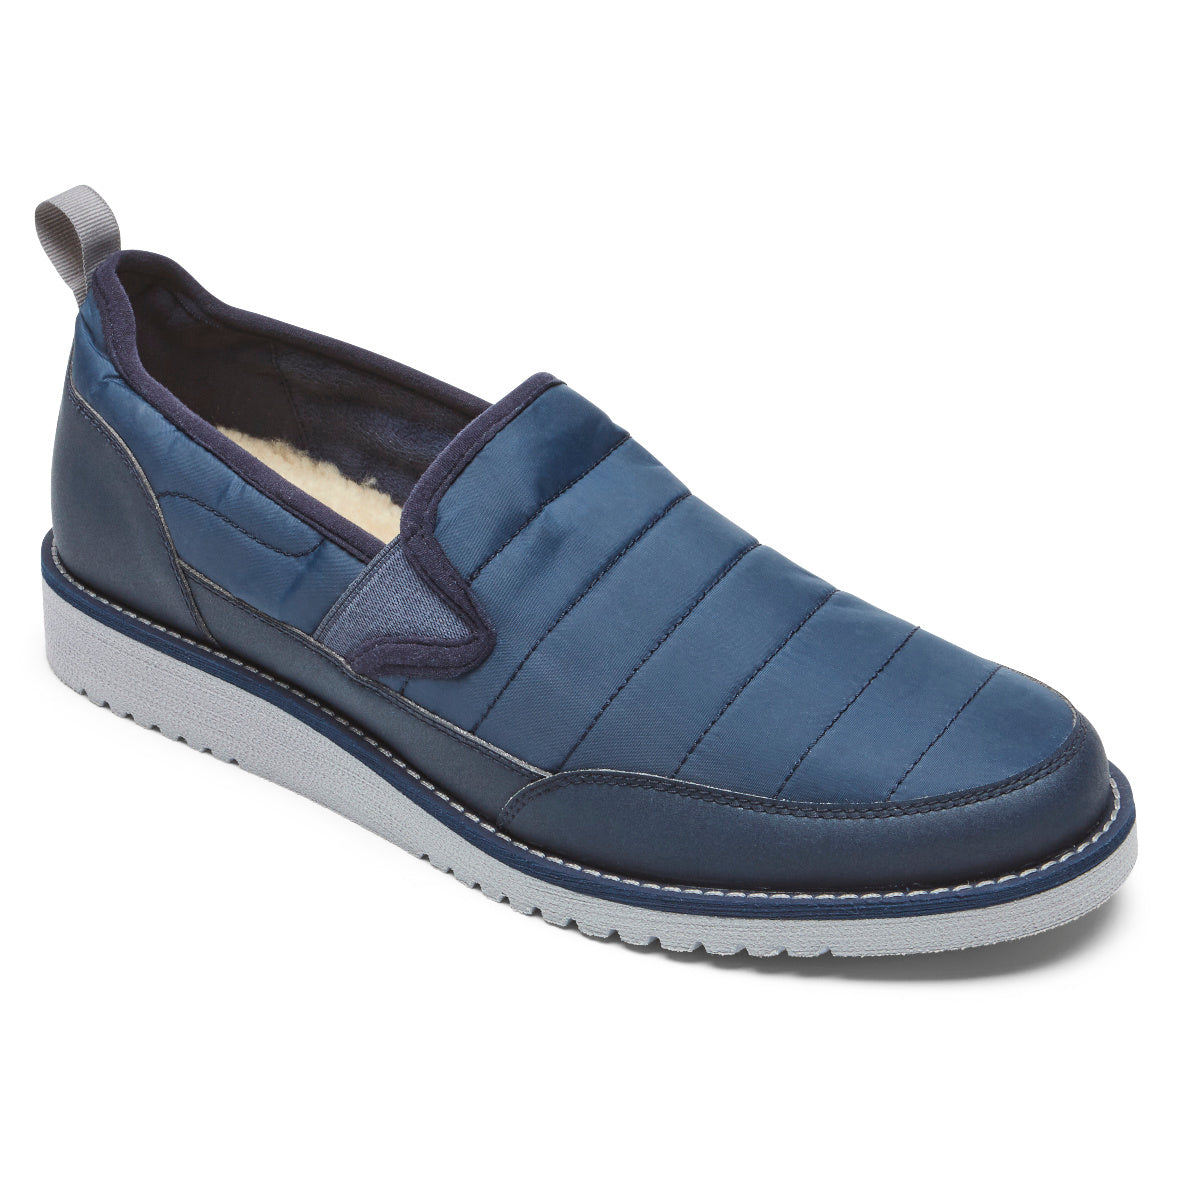 Rockport Mens Axelrod Quilted Slip-On